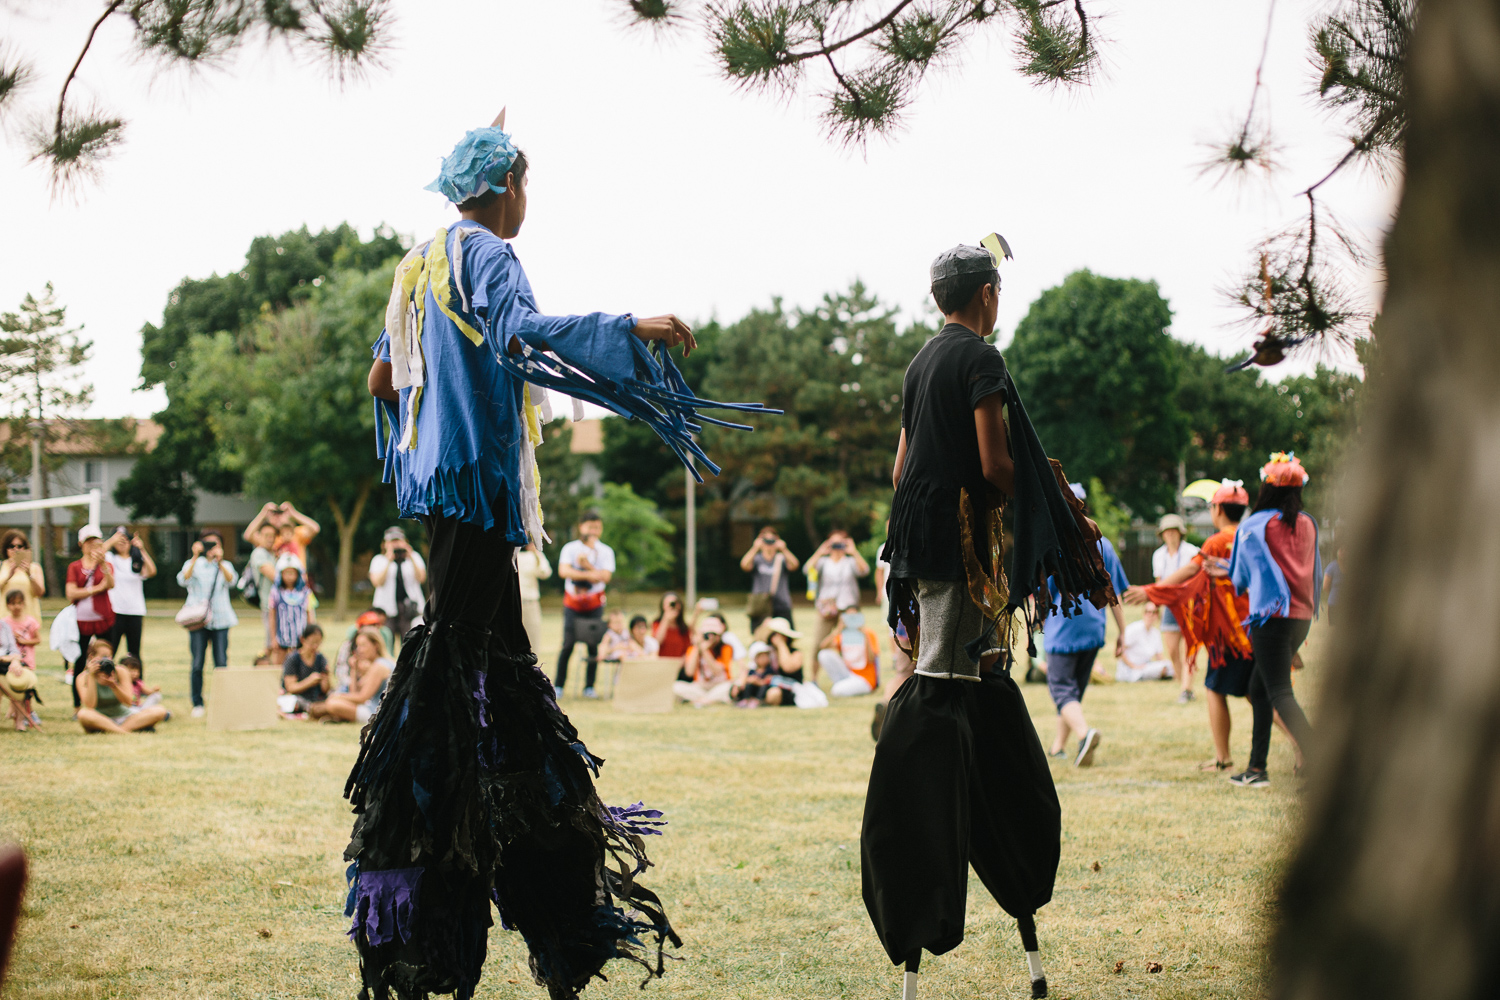 Two performers in costume on stilts through a field.